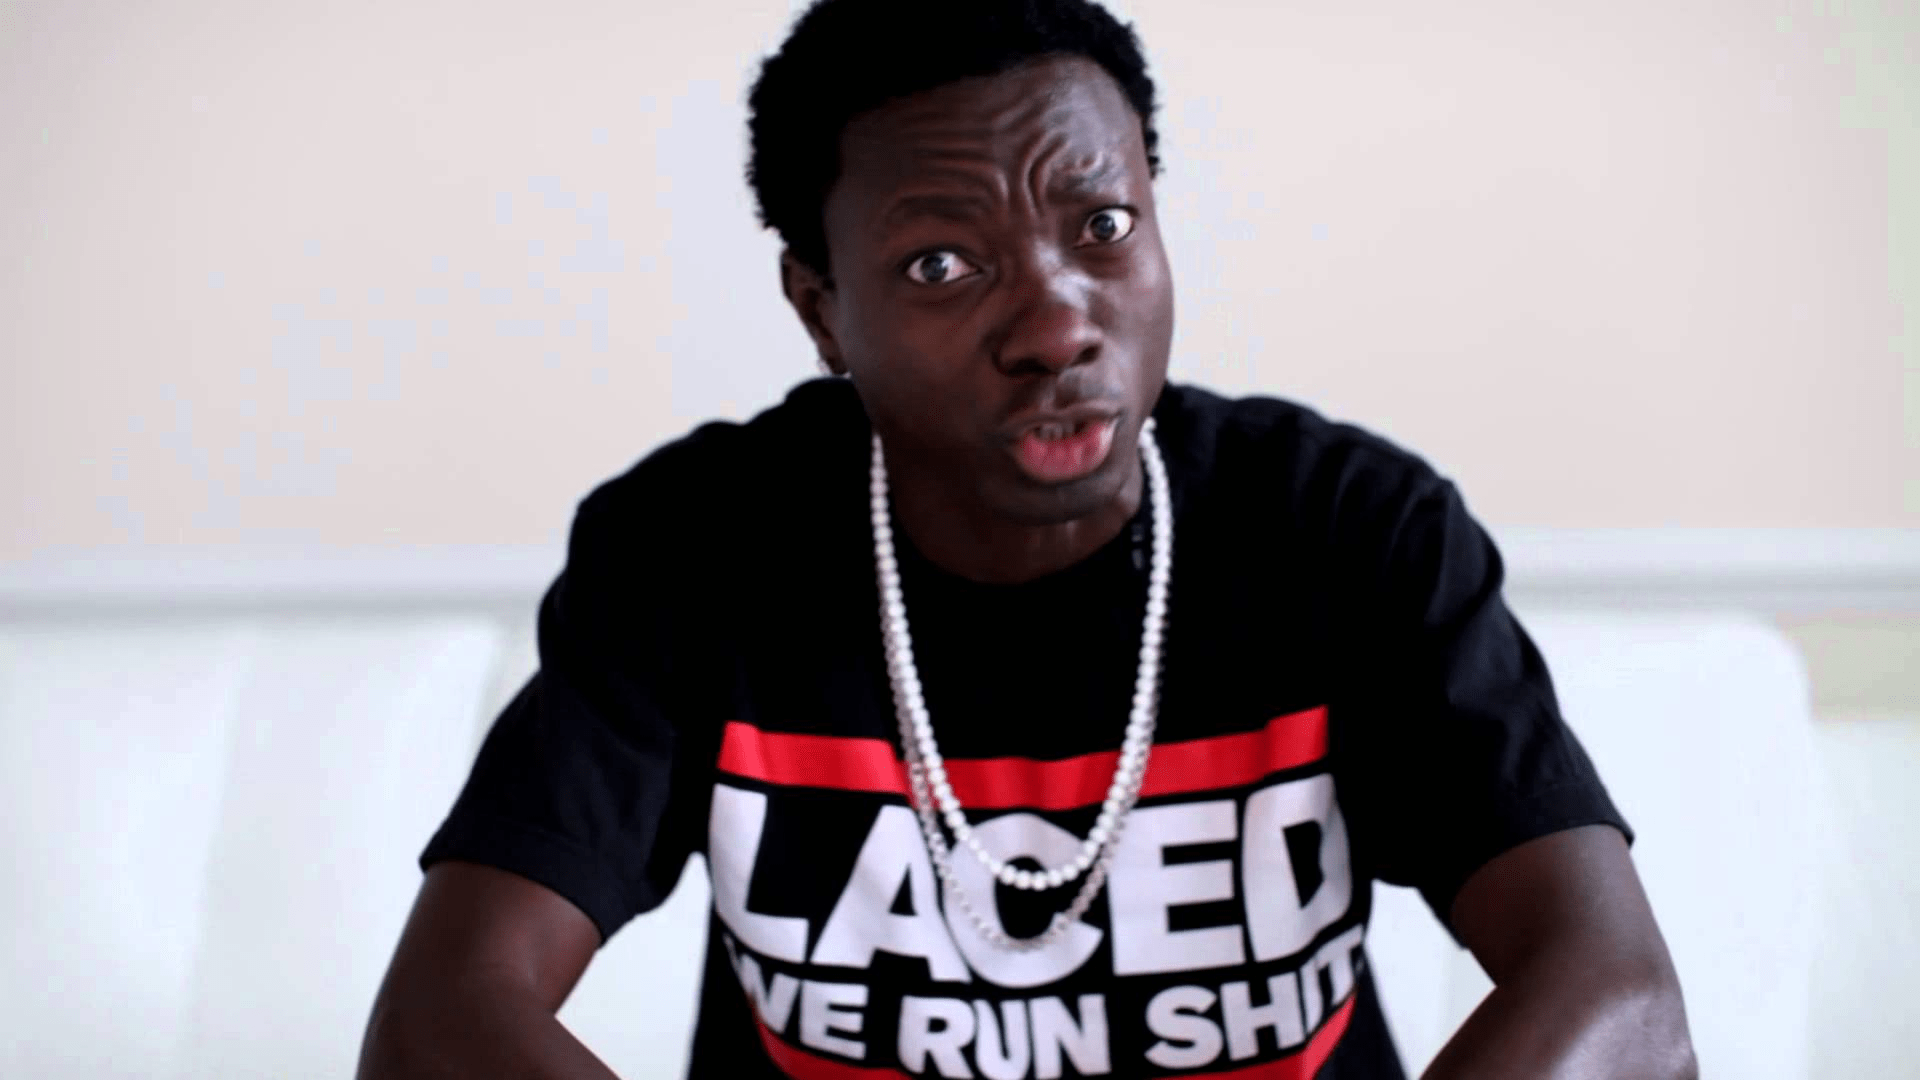 The violent fat antagonism in Michael Blackson's terrible joke about s...